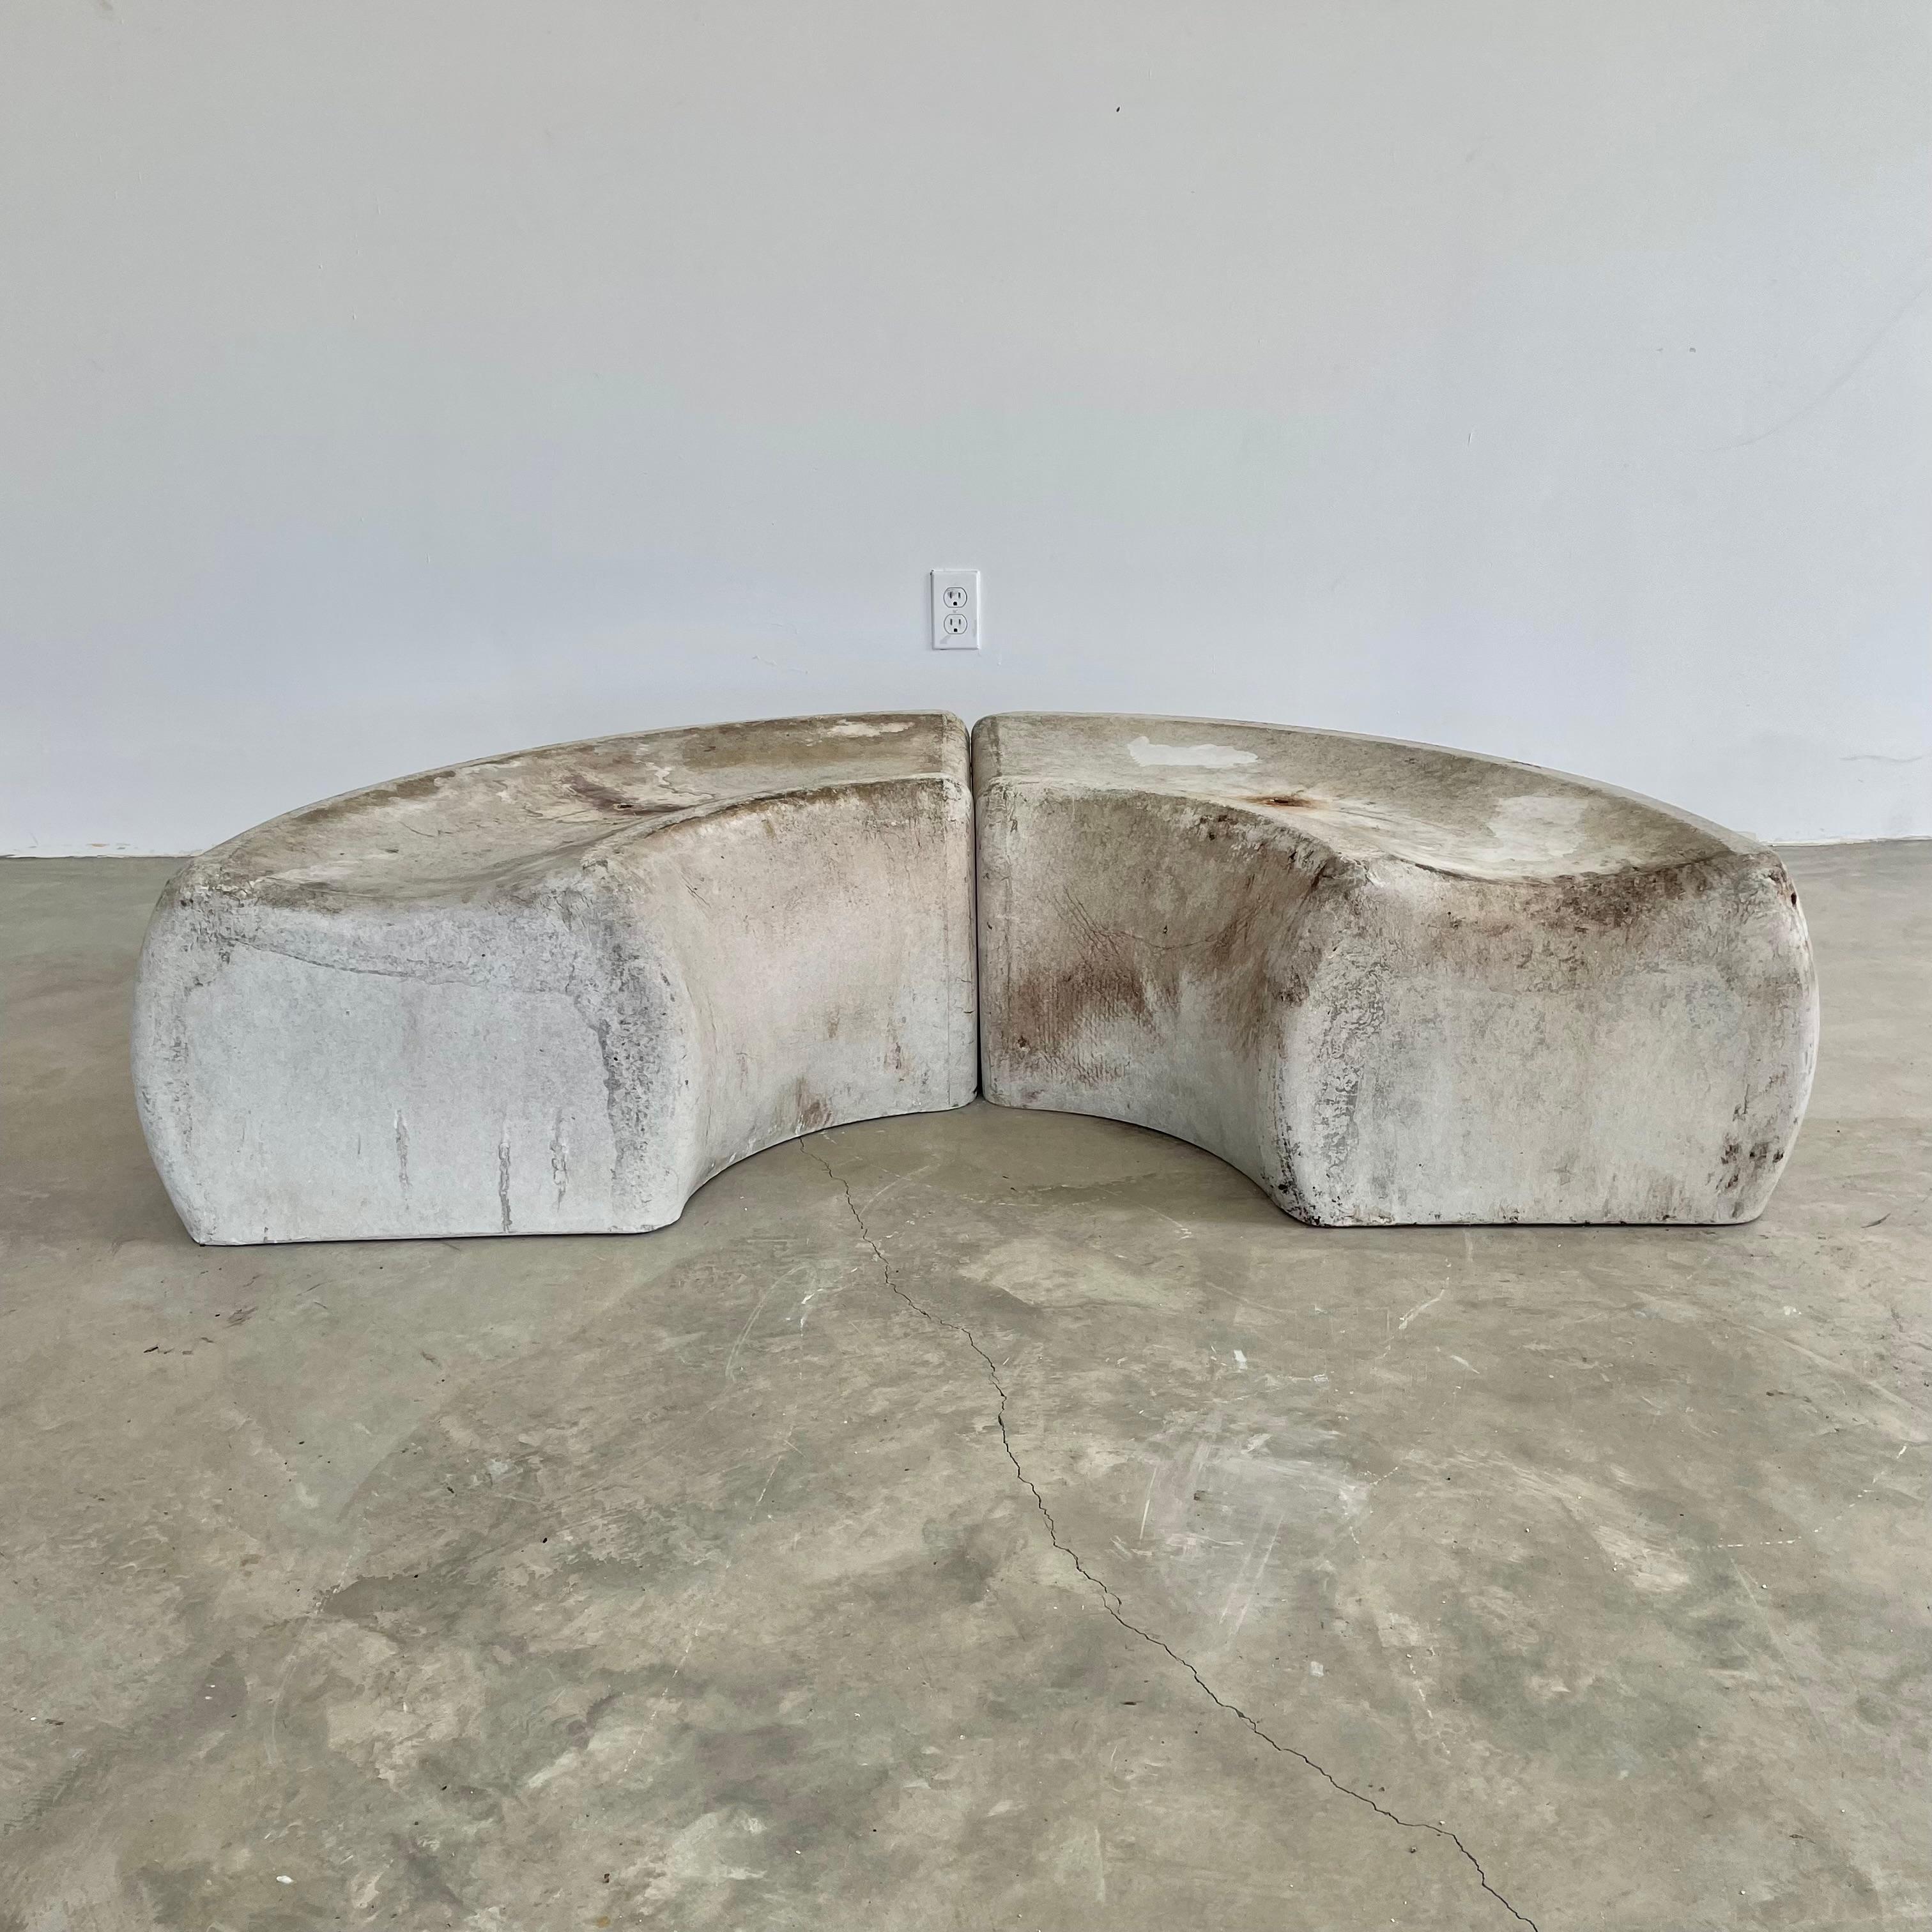 Substantial midcentury concrete seat/ bench by Eternit, circa 1960s. Perfect minimal concave design with convex sides that bow out gently. The bench is made of solid fiber cement which allows it to develop an incredible patina. Factory drilled